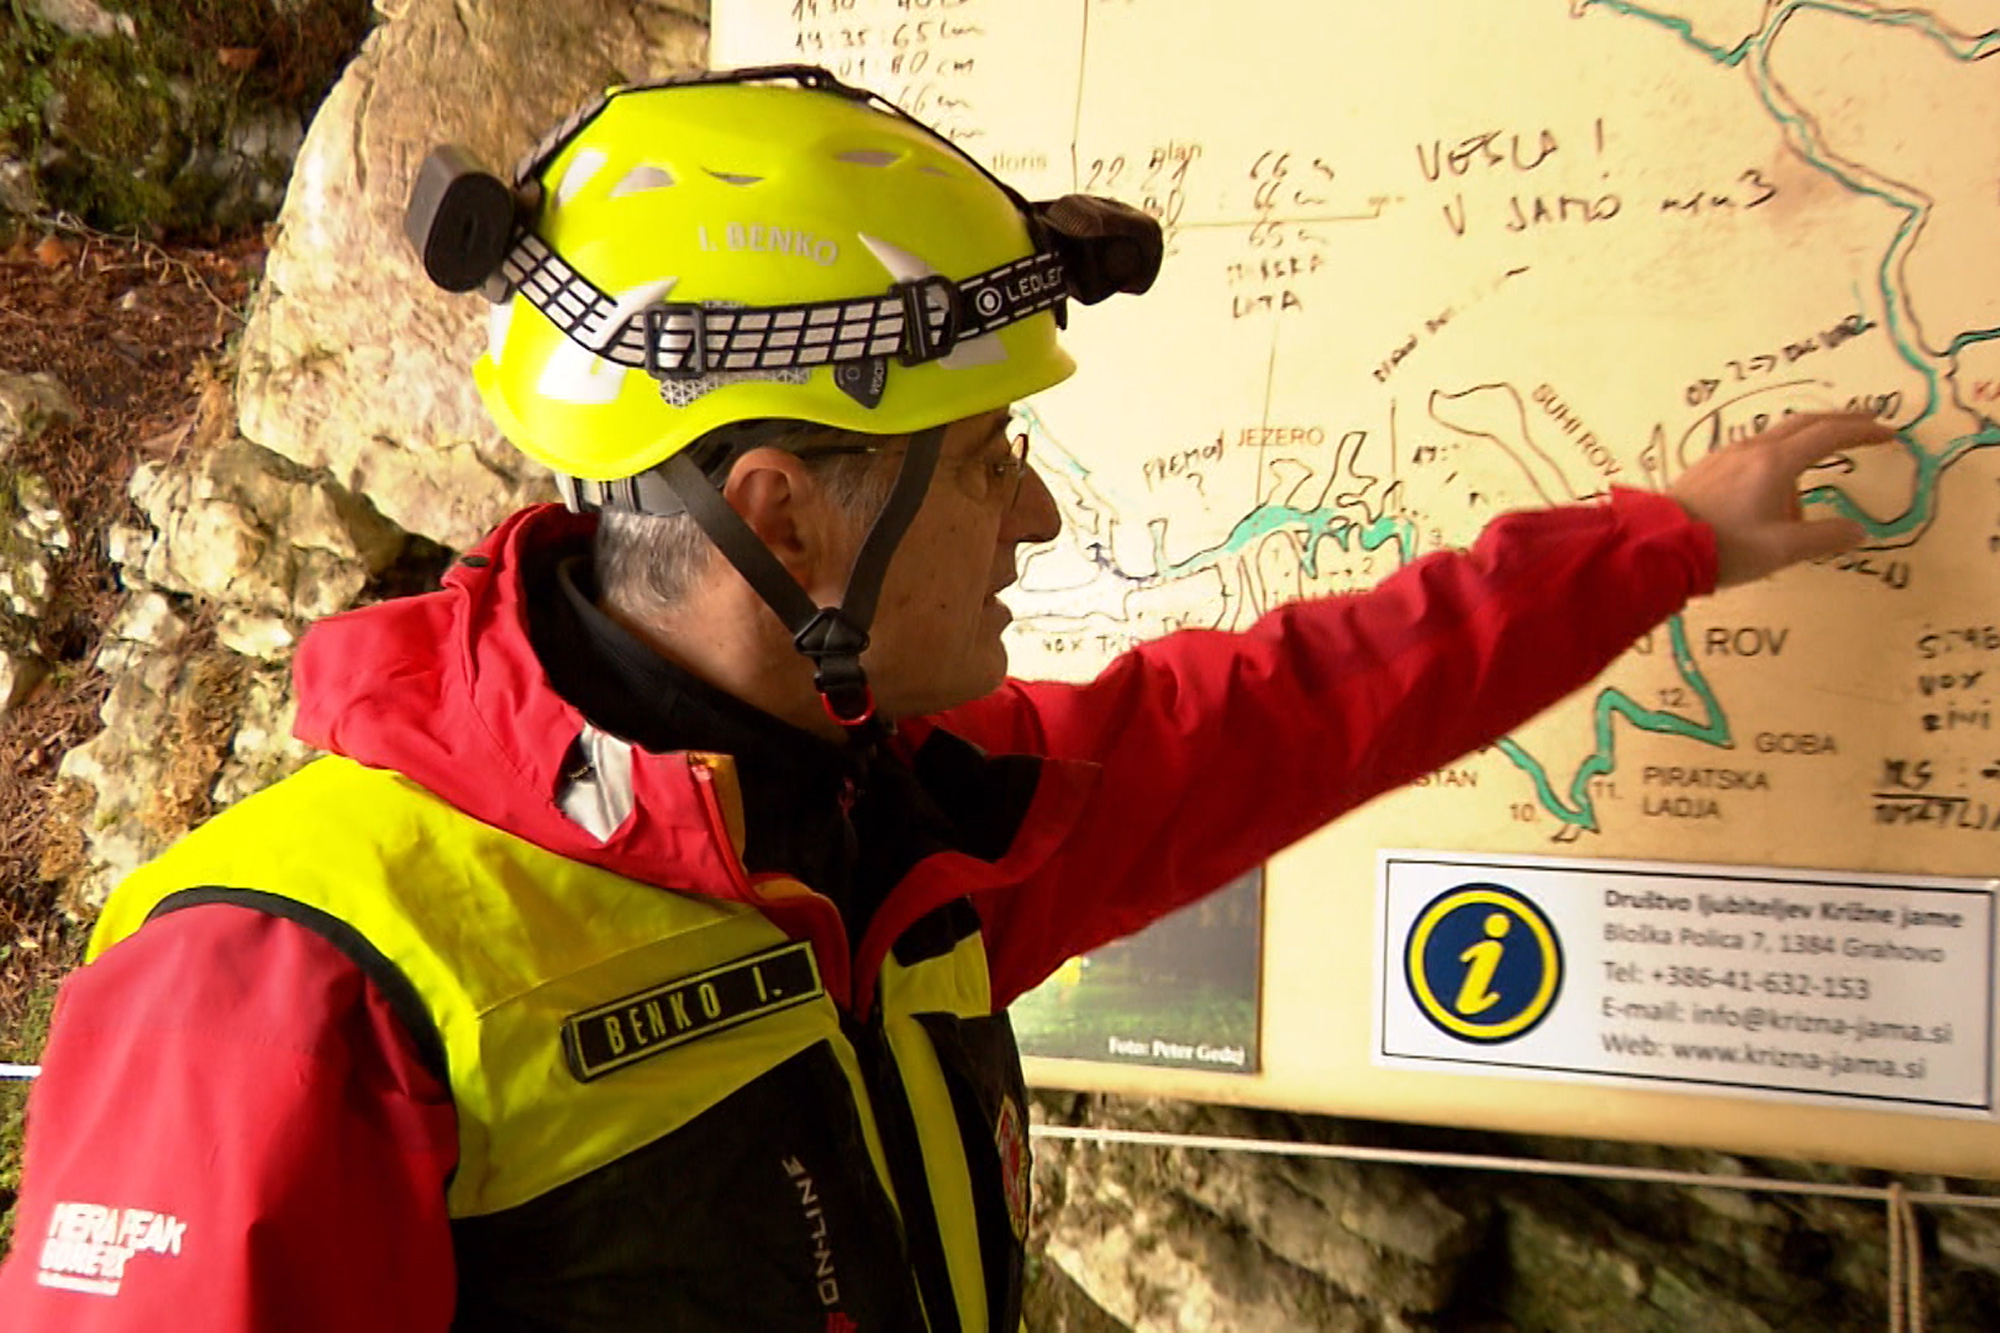 A rescuer inspects the map of Krizna Jama cave near Grahovo, Slovenia, on Sunday. Five people have been trapped in the cave since Saturday.